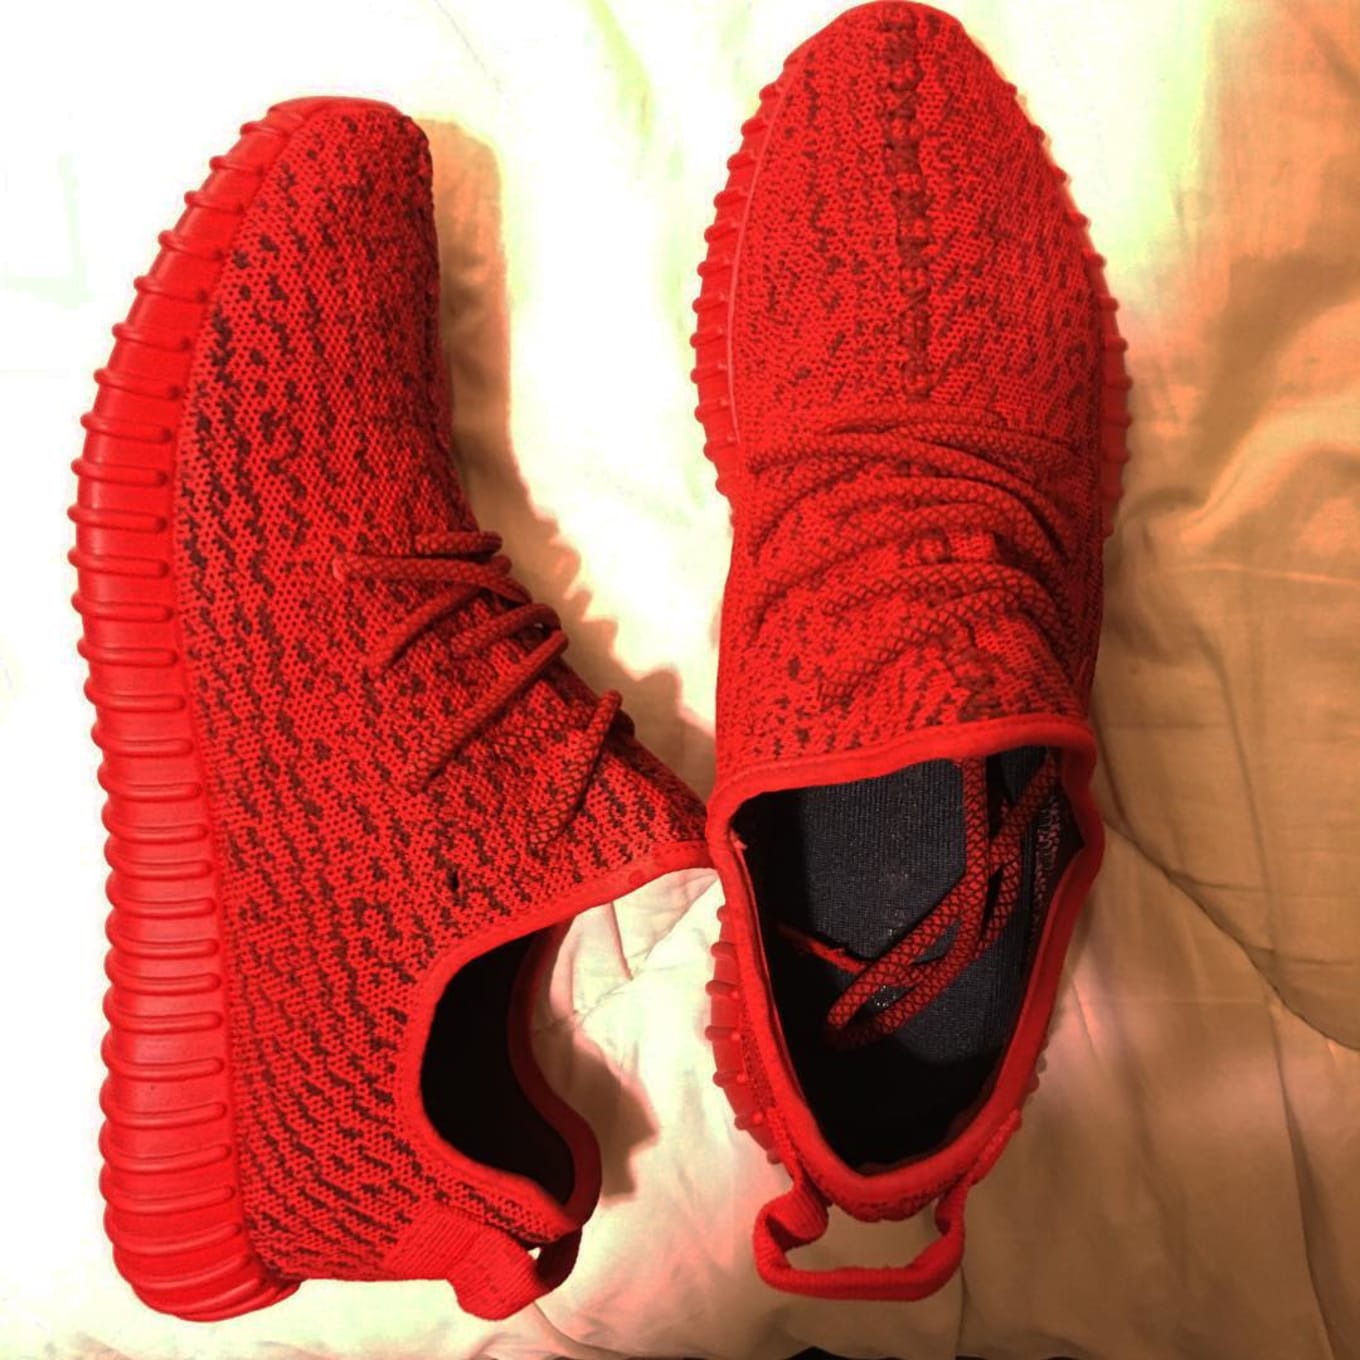 all red yeezys Shop Clothing \u0026 Shoes Online